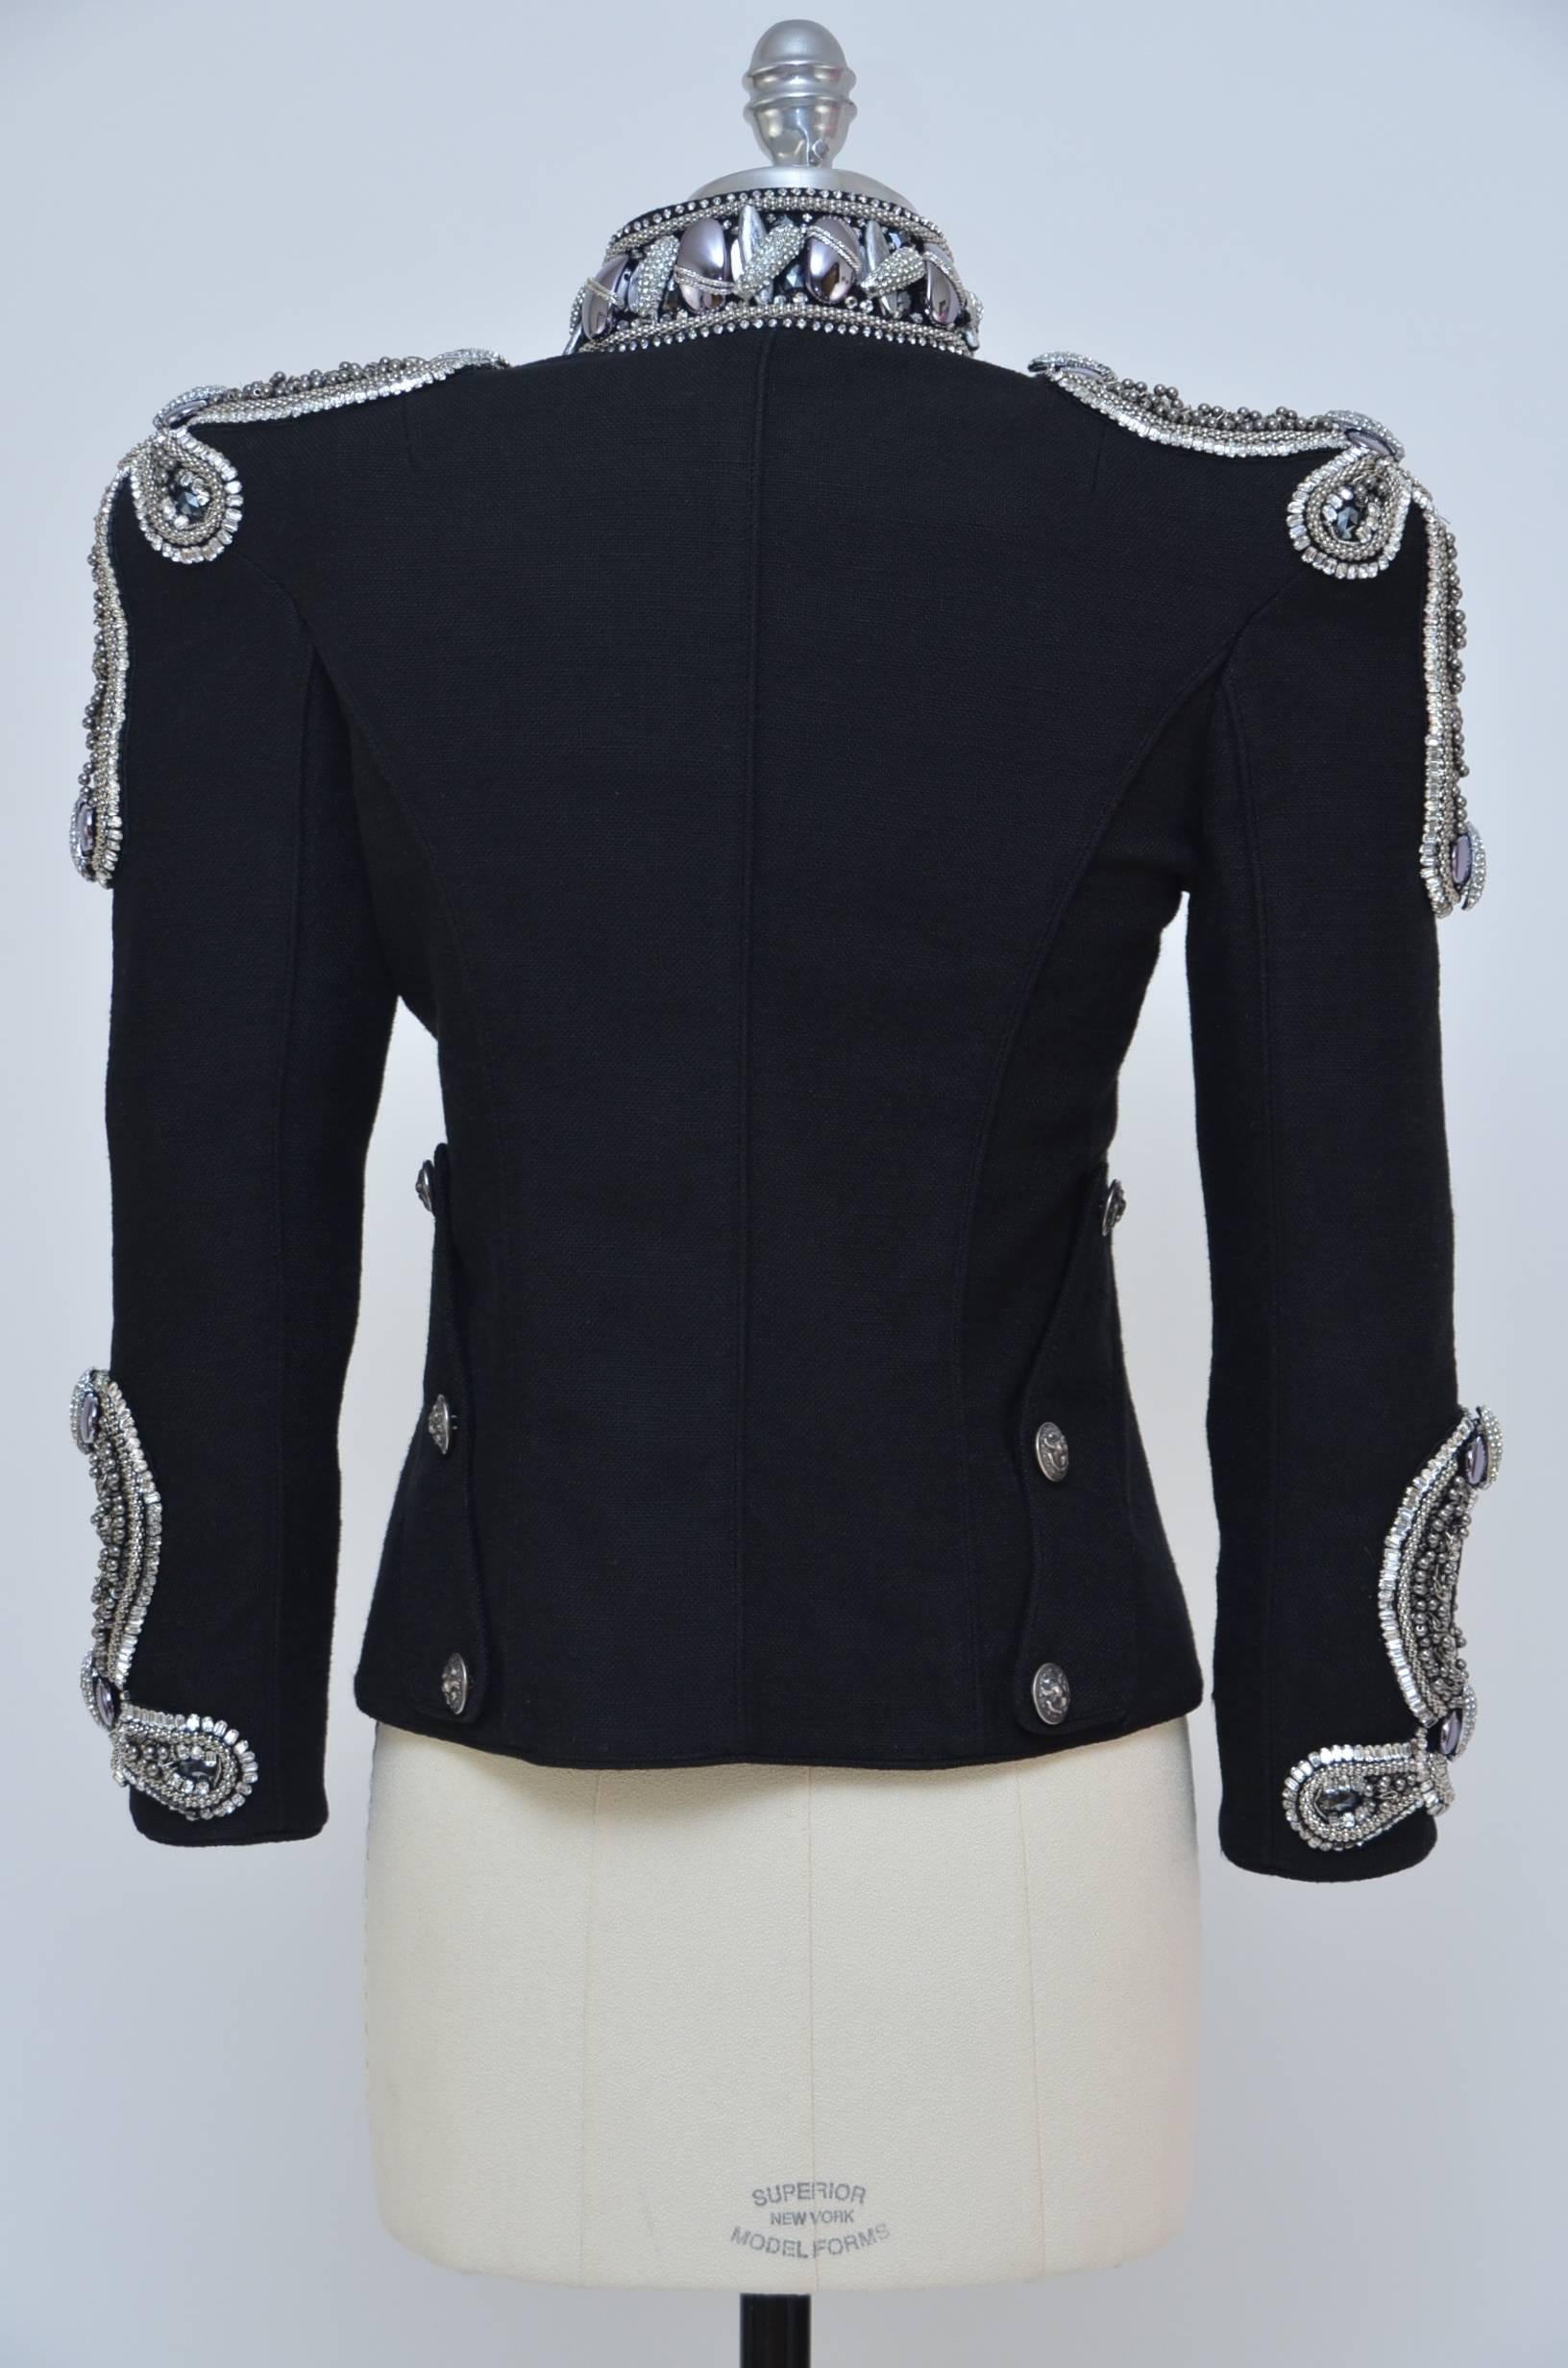 Balmain crystals,pearls(imitation) and metal embellished exclusive rare jacket from highly desirable and collectible Christophe Decarnin 2009 runway collection.Seen on the best dressed : Anna Dello Russo,Cindy Crawford,  Beyonce,Daria Werbowy and